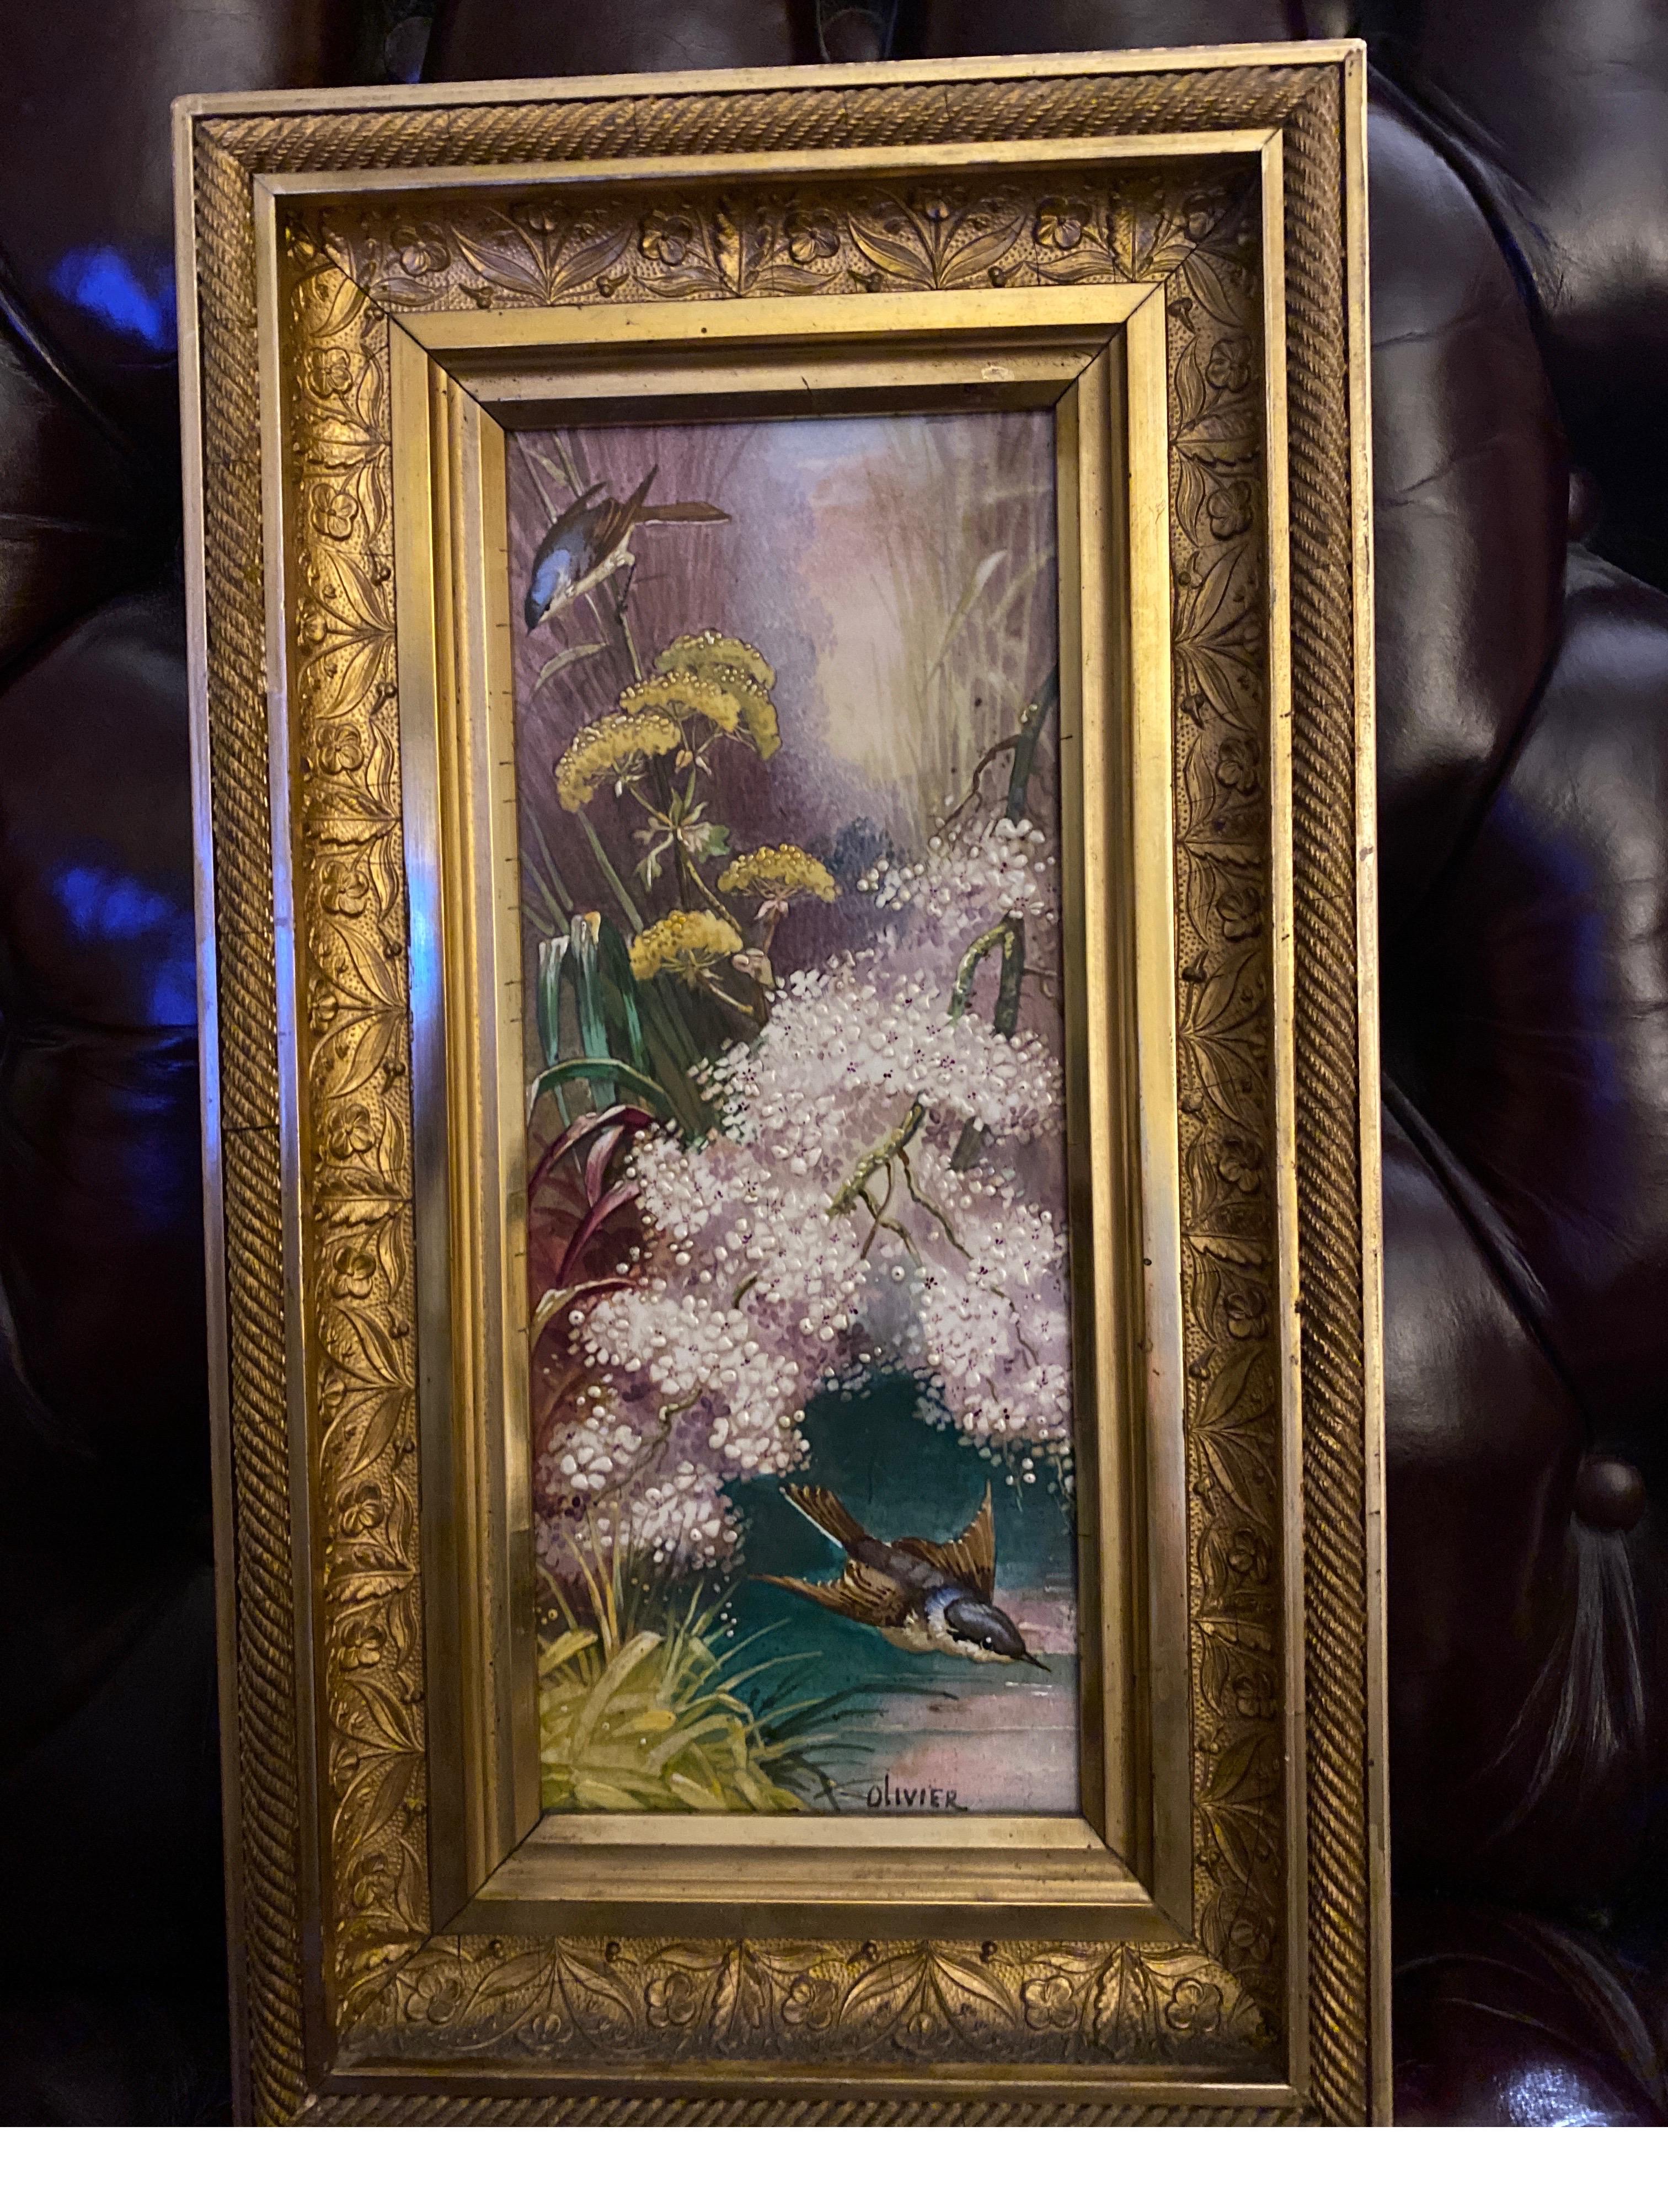 19th Century French Hand Painted Framed Porcelain Tile In Excellent Condition For Sale In Lambertville, NJ